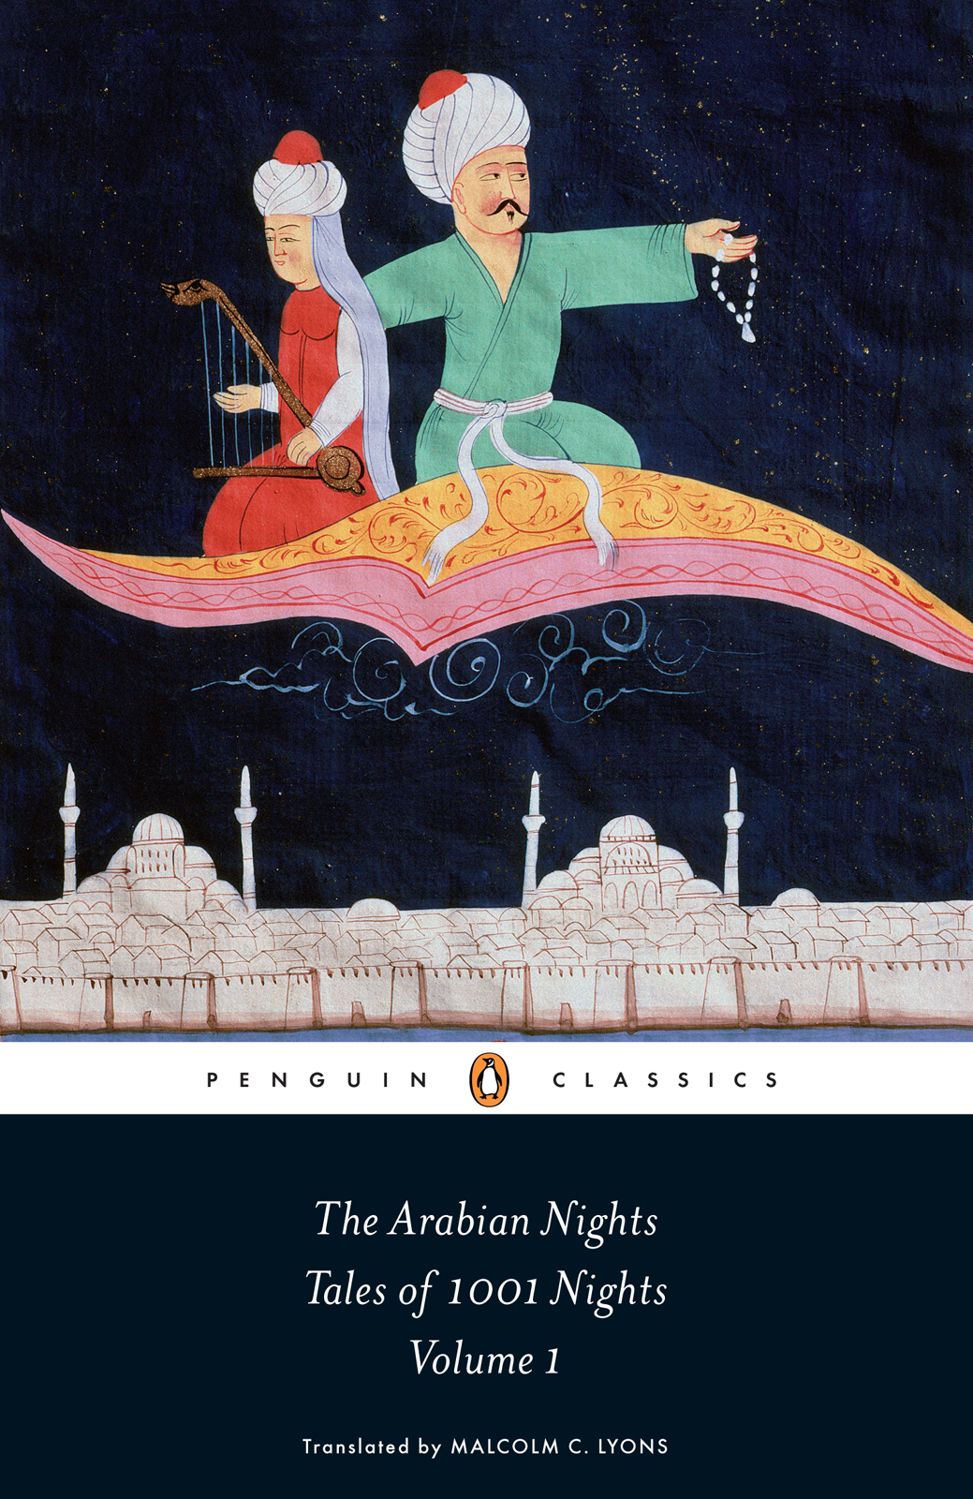 The cover of Penguin Classic's edition of 1,001 Nights